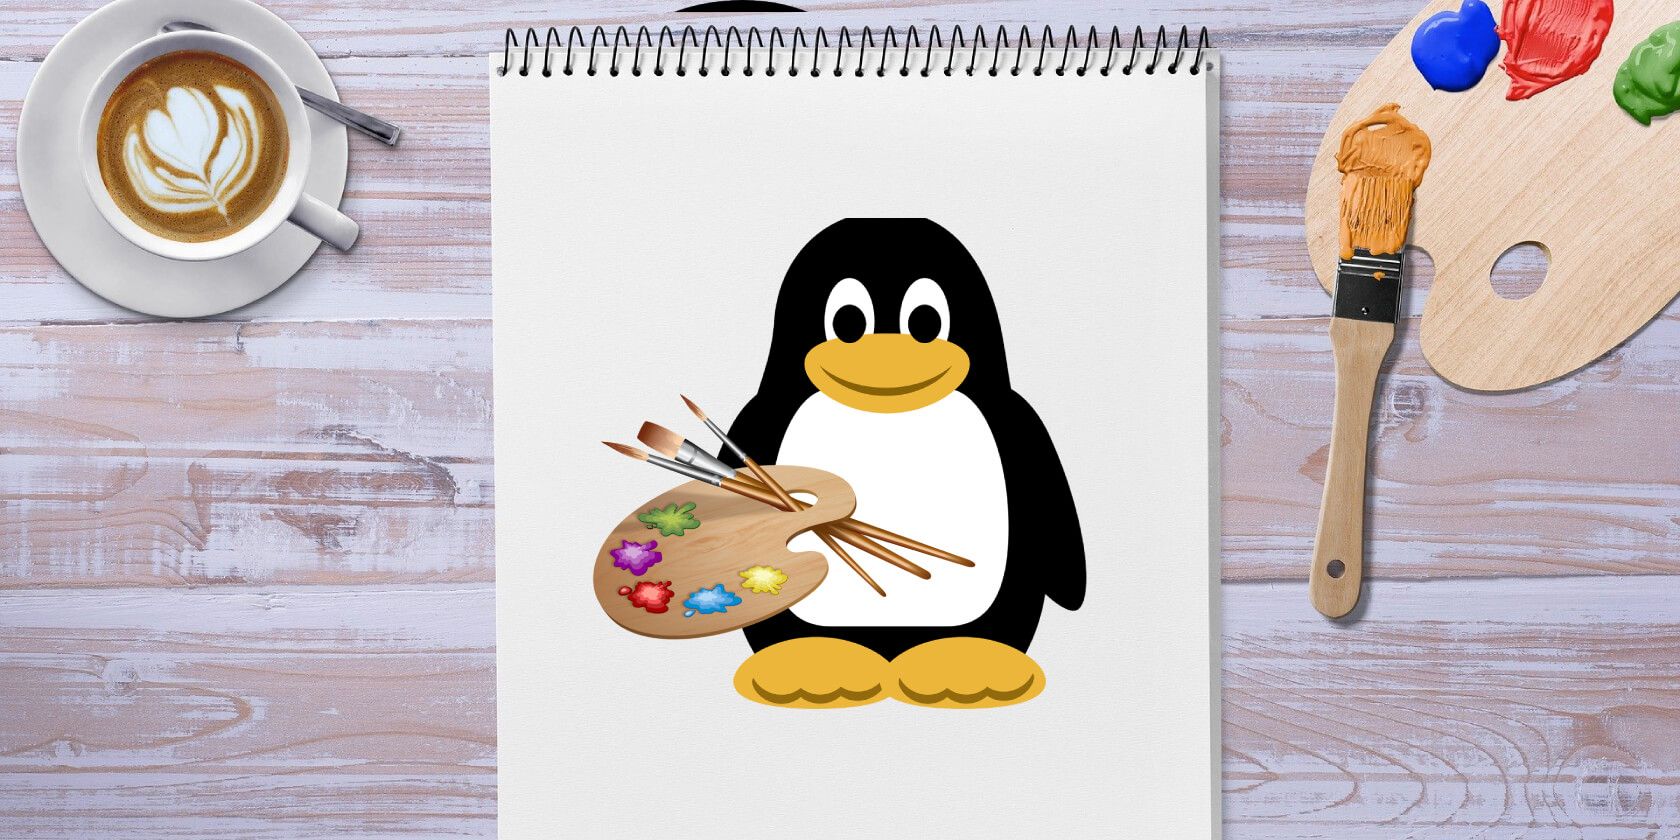 Drawing - an alternative to Paint for Linux